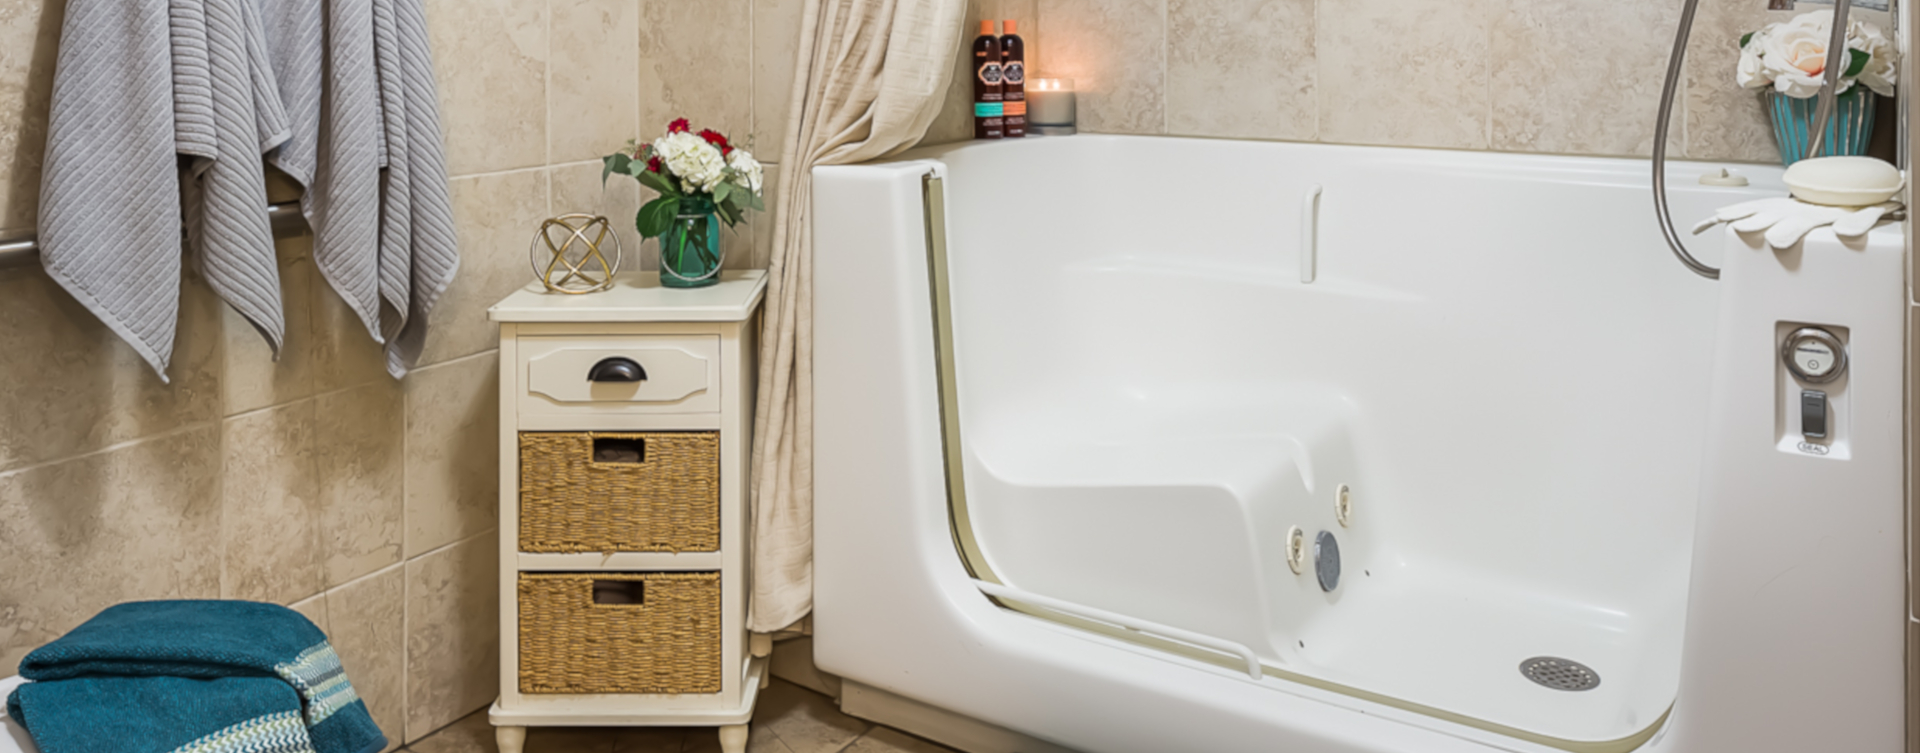 With an easy access design, our whirlpool allows you to enjoy a warm bath safely and comfortably at Bickford of Urbandale